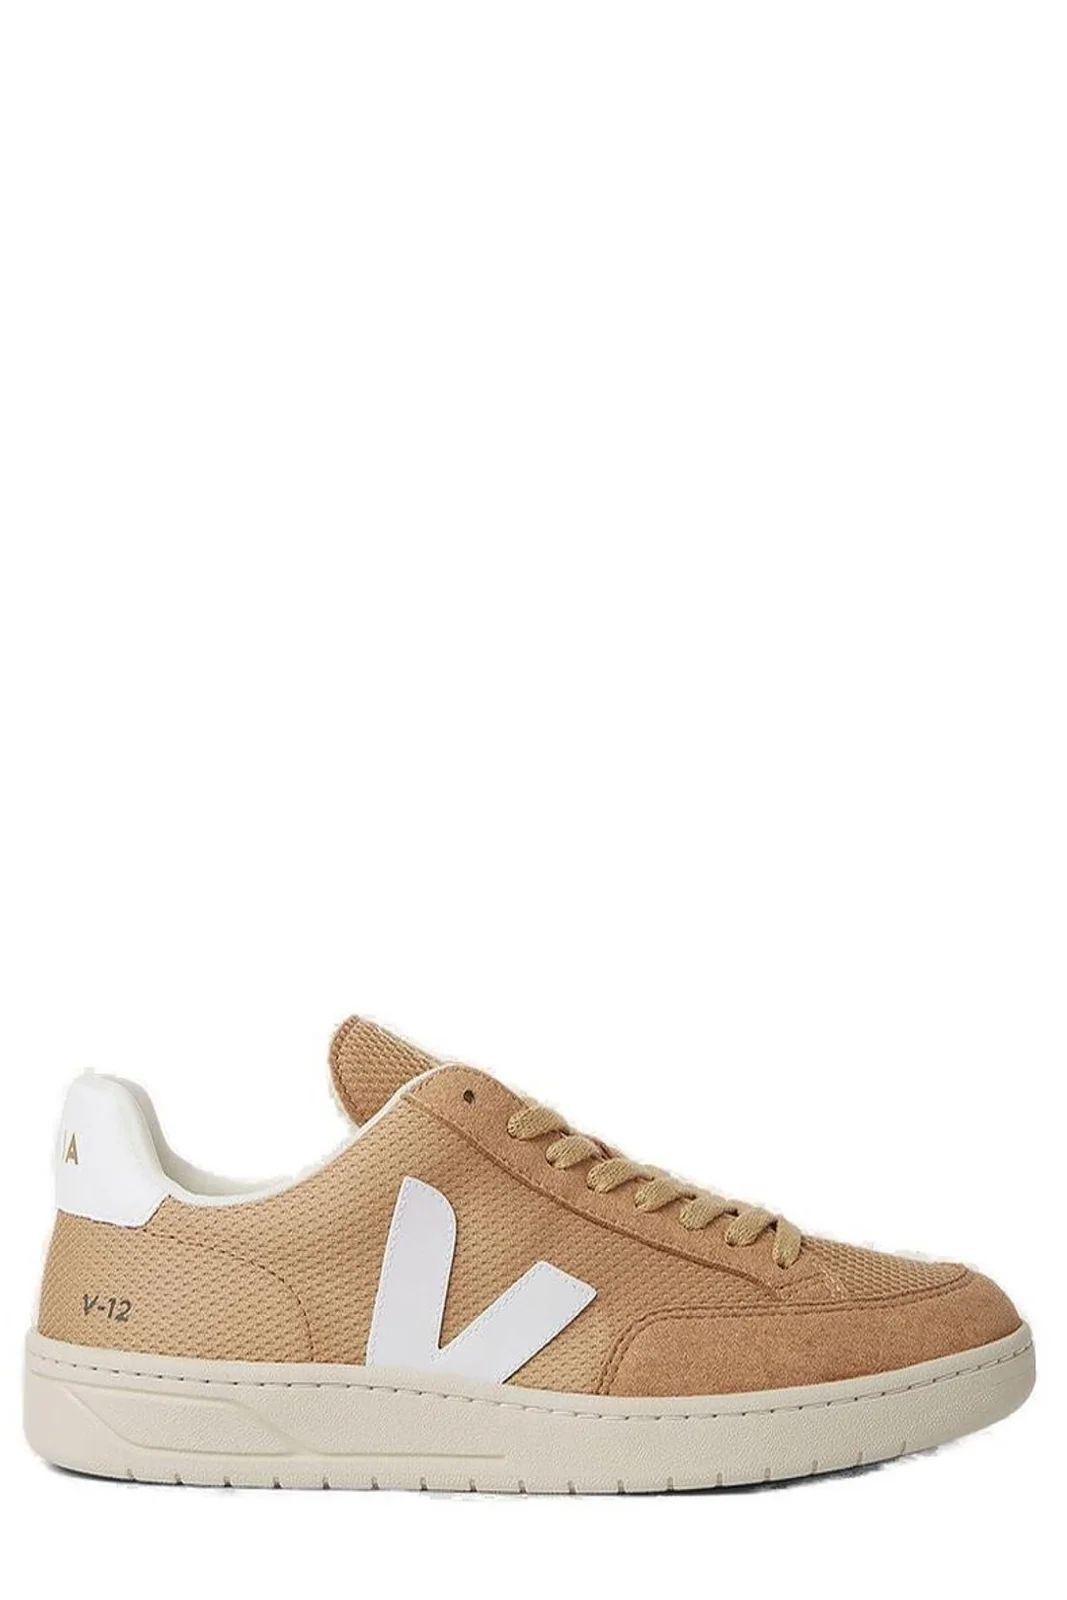 Veja V-12 Lace-Up Sneakers | Cettire Global